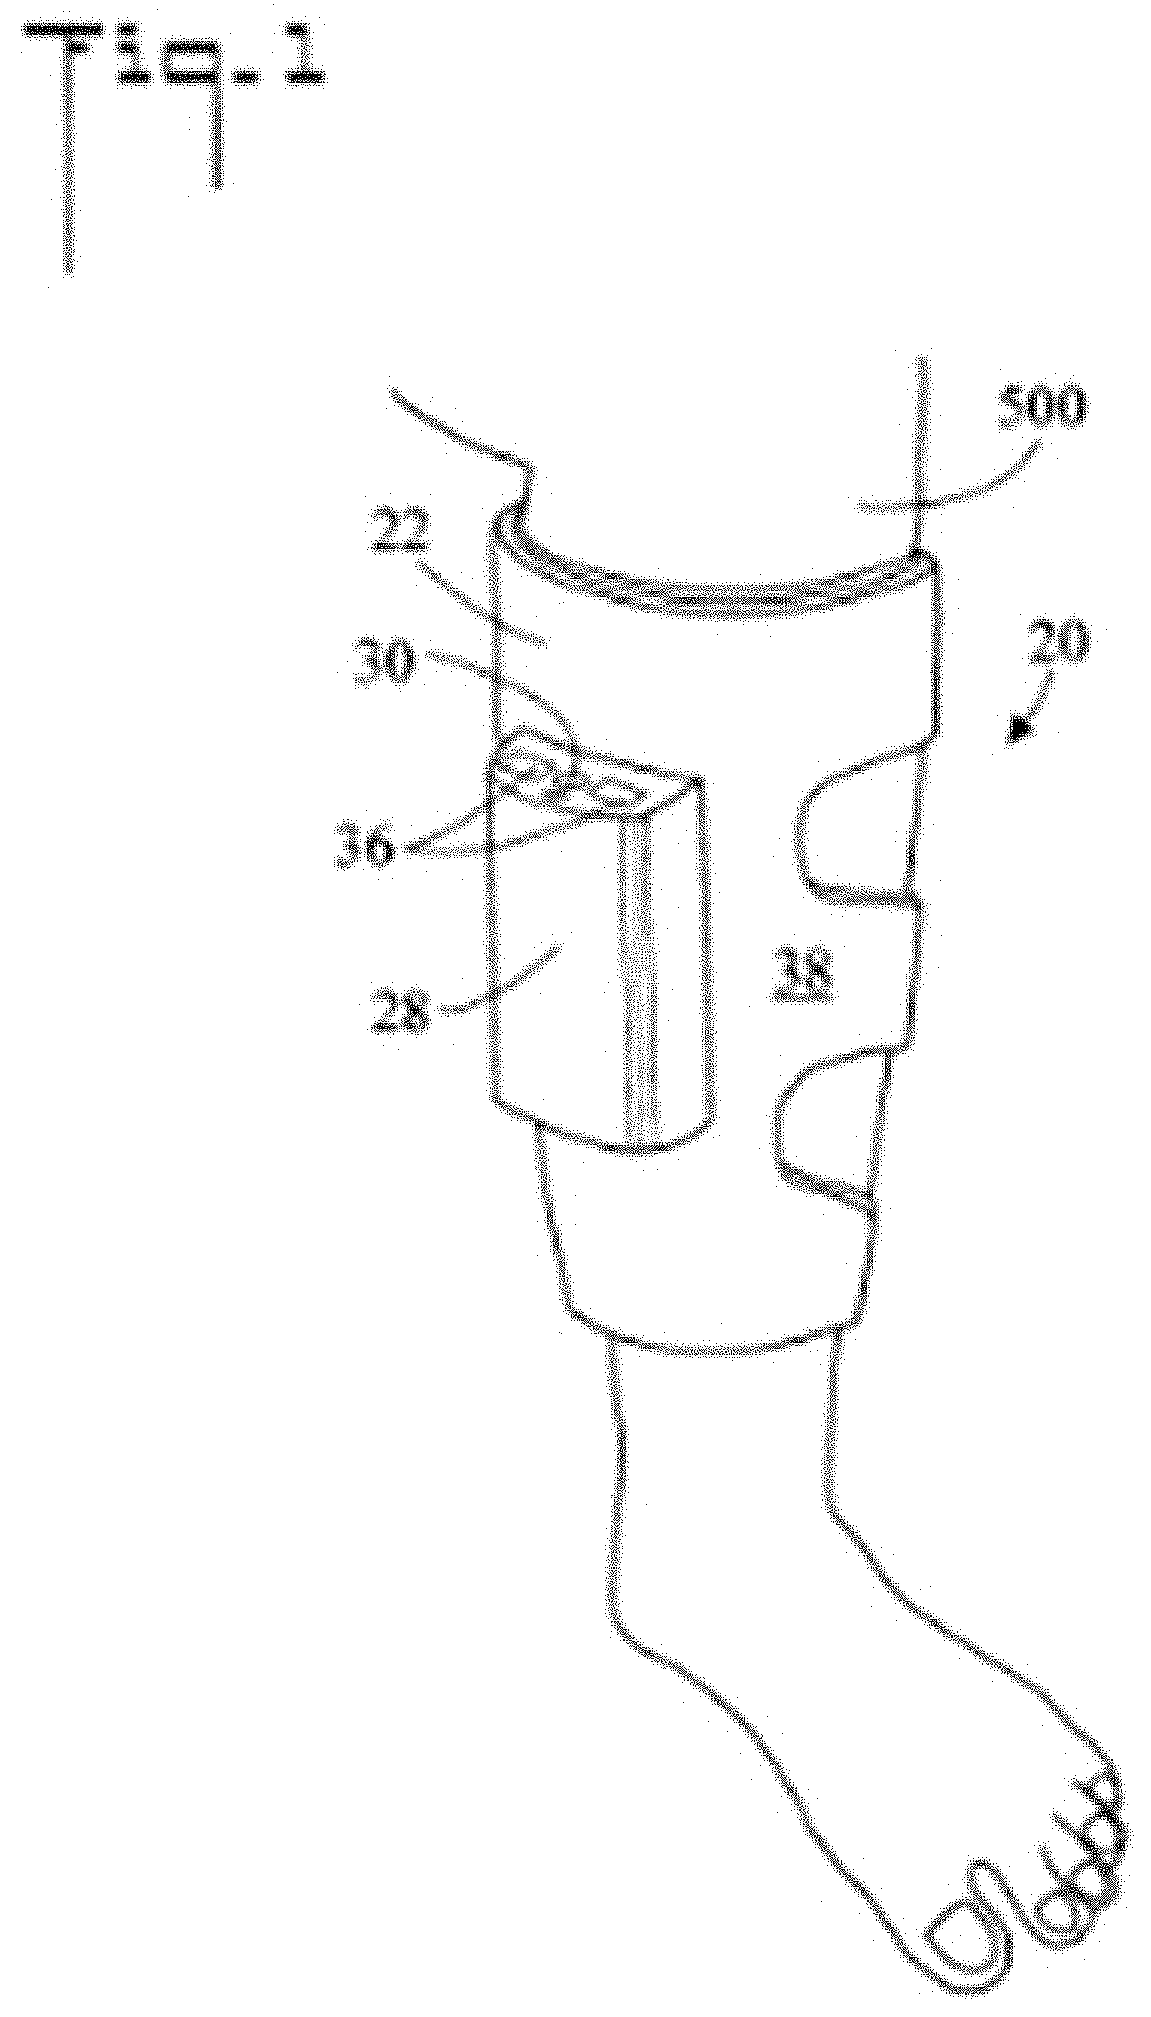 Apparatus for applying periodic pressure to the limb of a patient and method of use